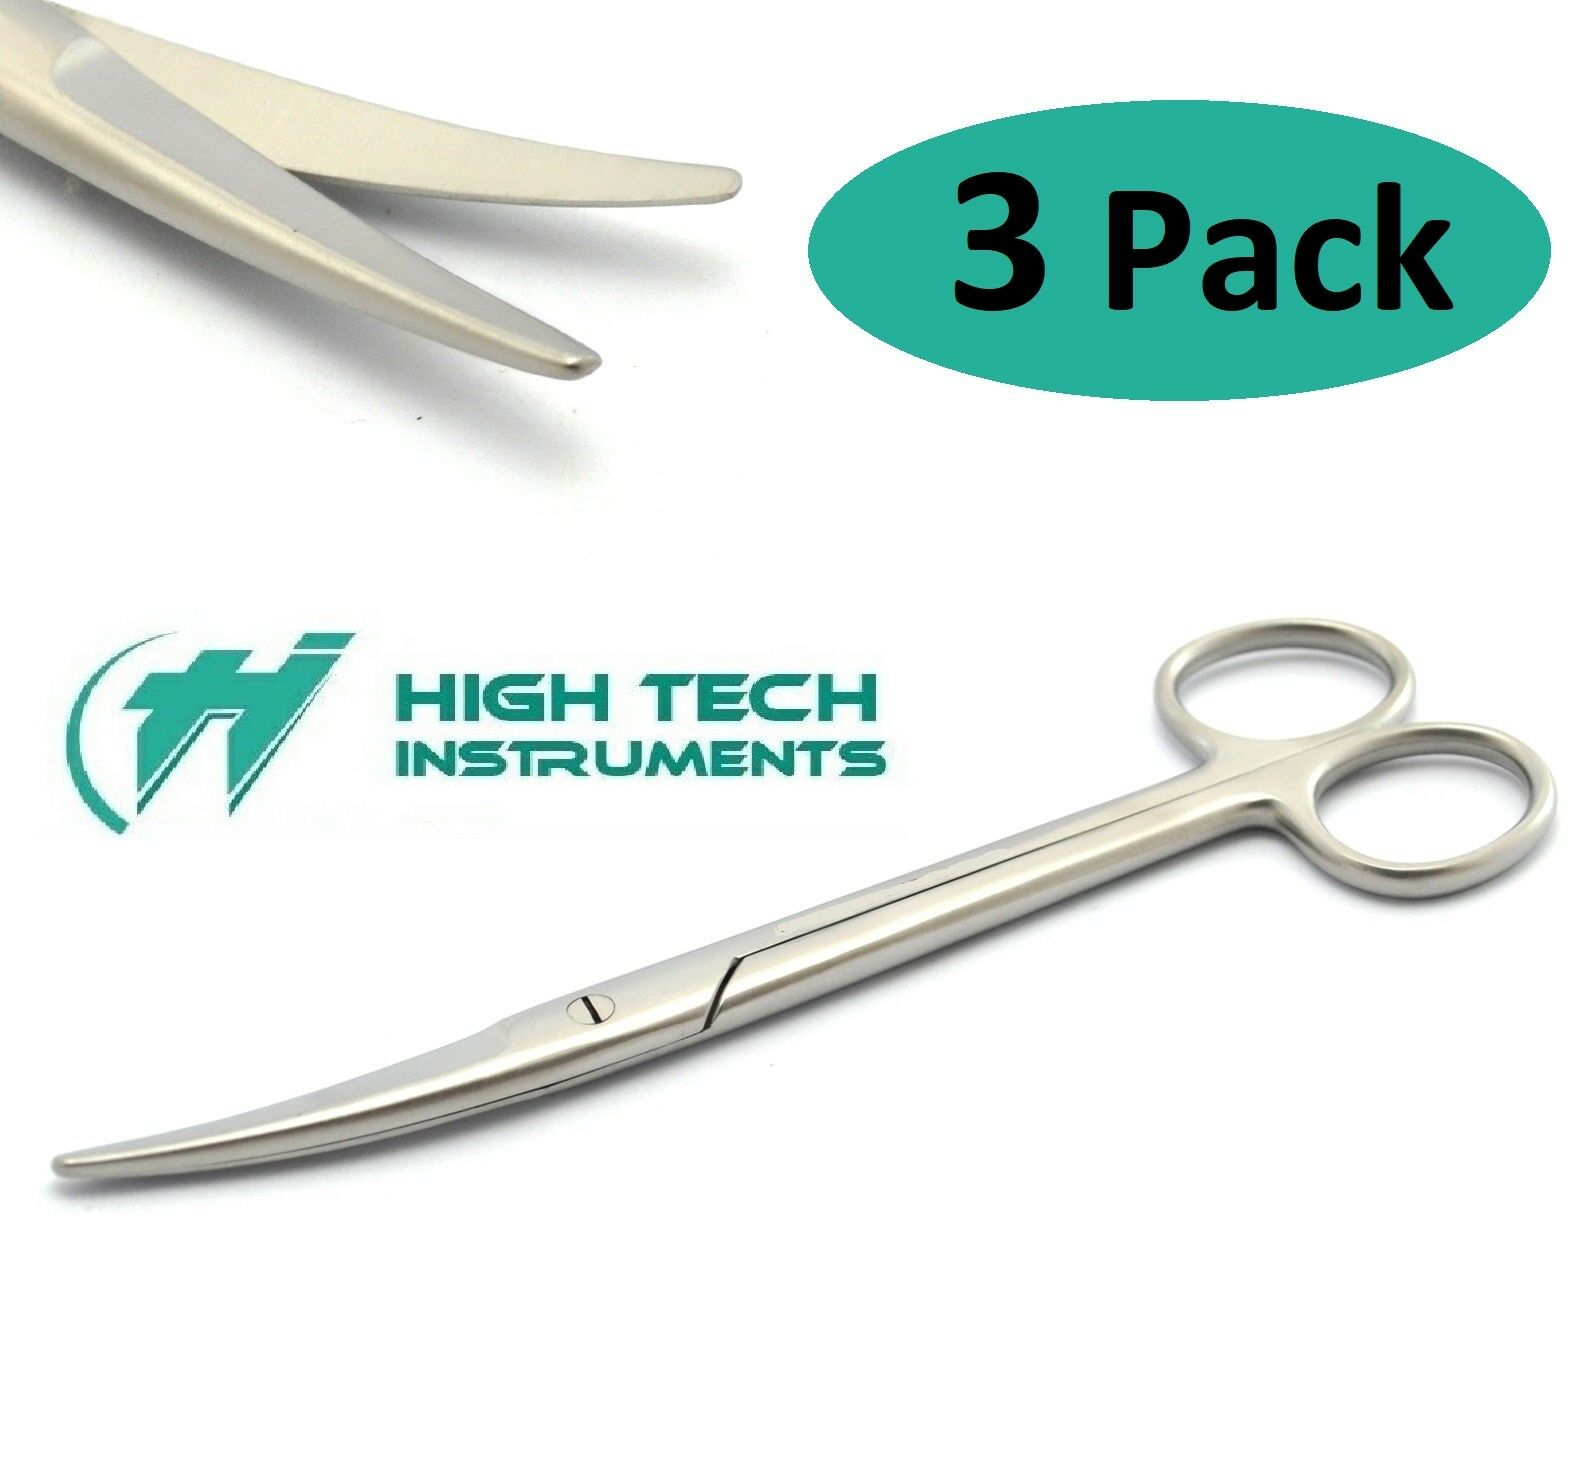 3 Surgical Operating Medical Mayo Scissors Curved 6.75" Blunt/blunt Instruments